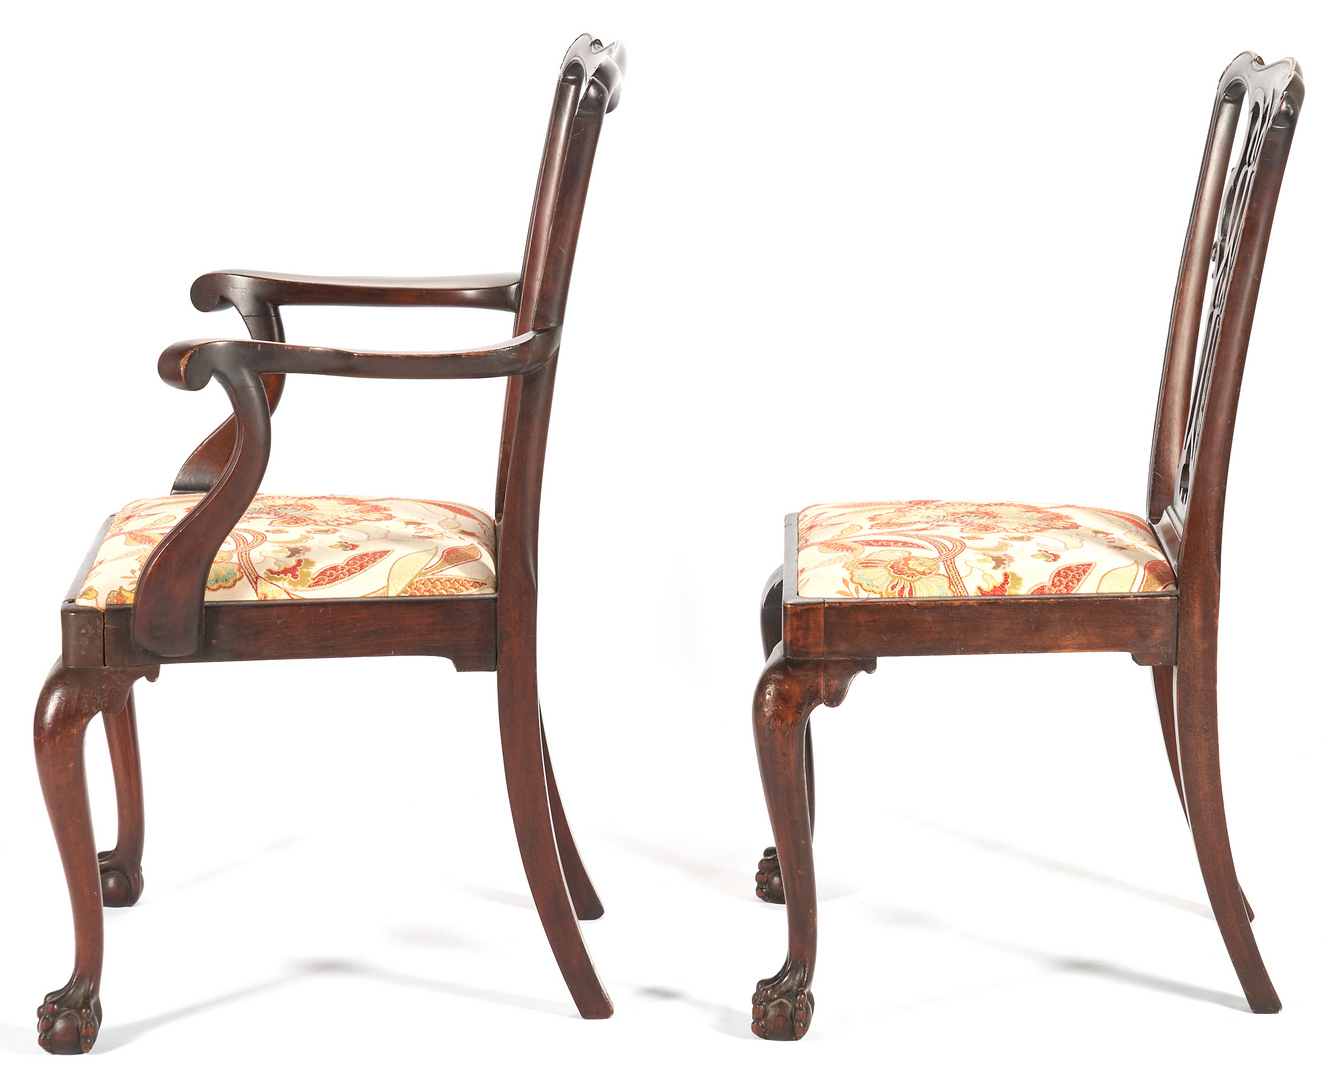 Lot 152: Set of 7 Chippendale Style Carved Mahogany Dining Chairs